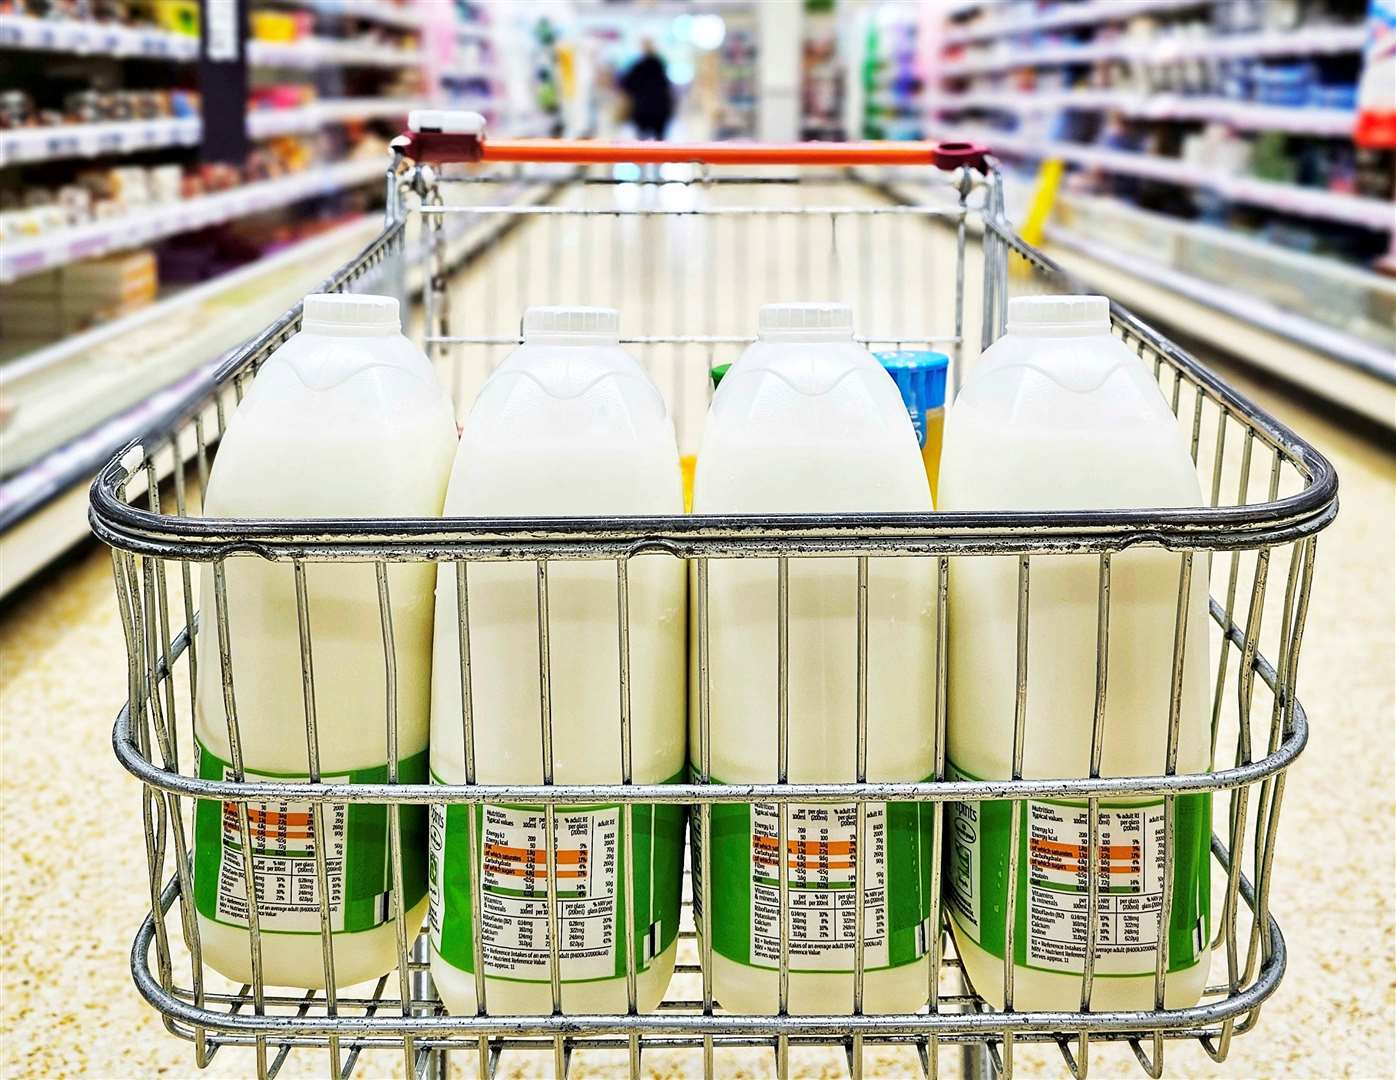 Tesco is phasing out its largest six-pint milk carton. Image: iStock photo.